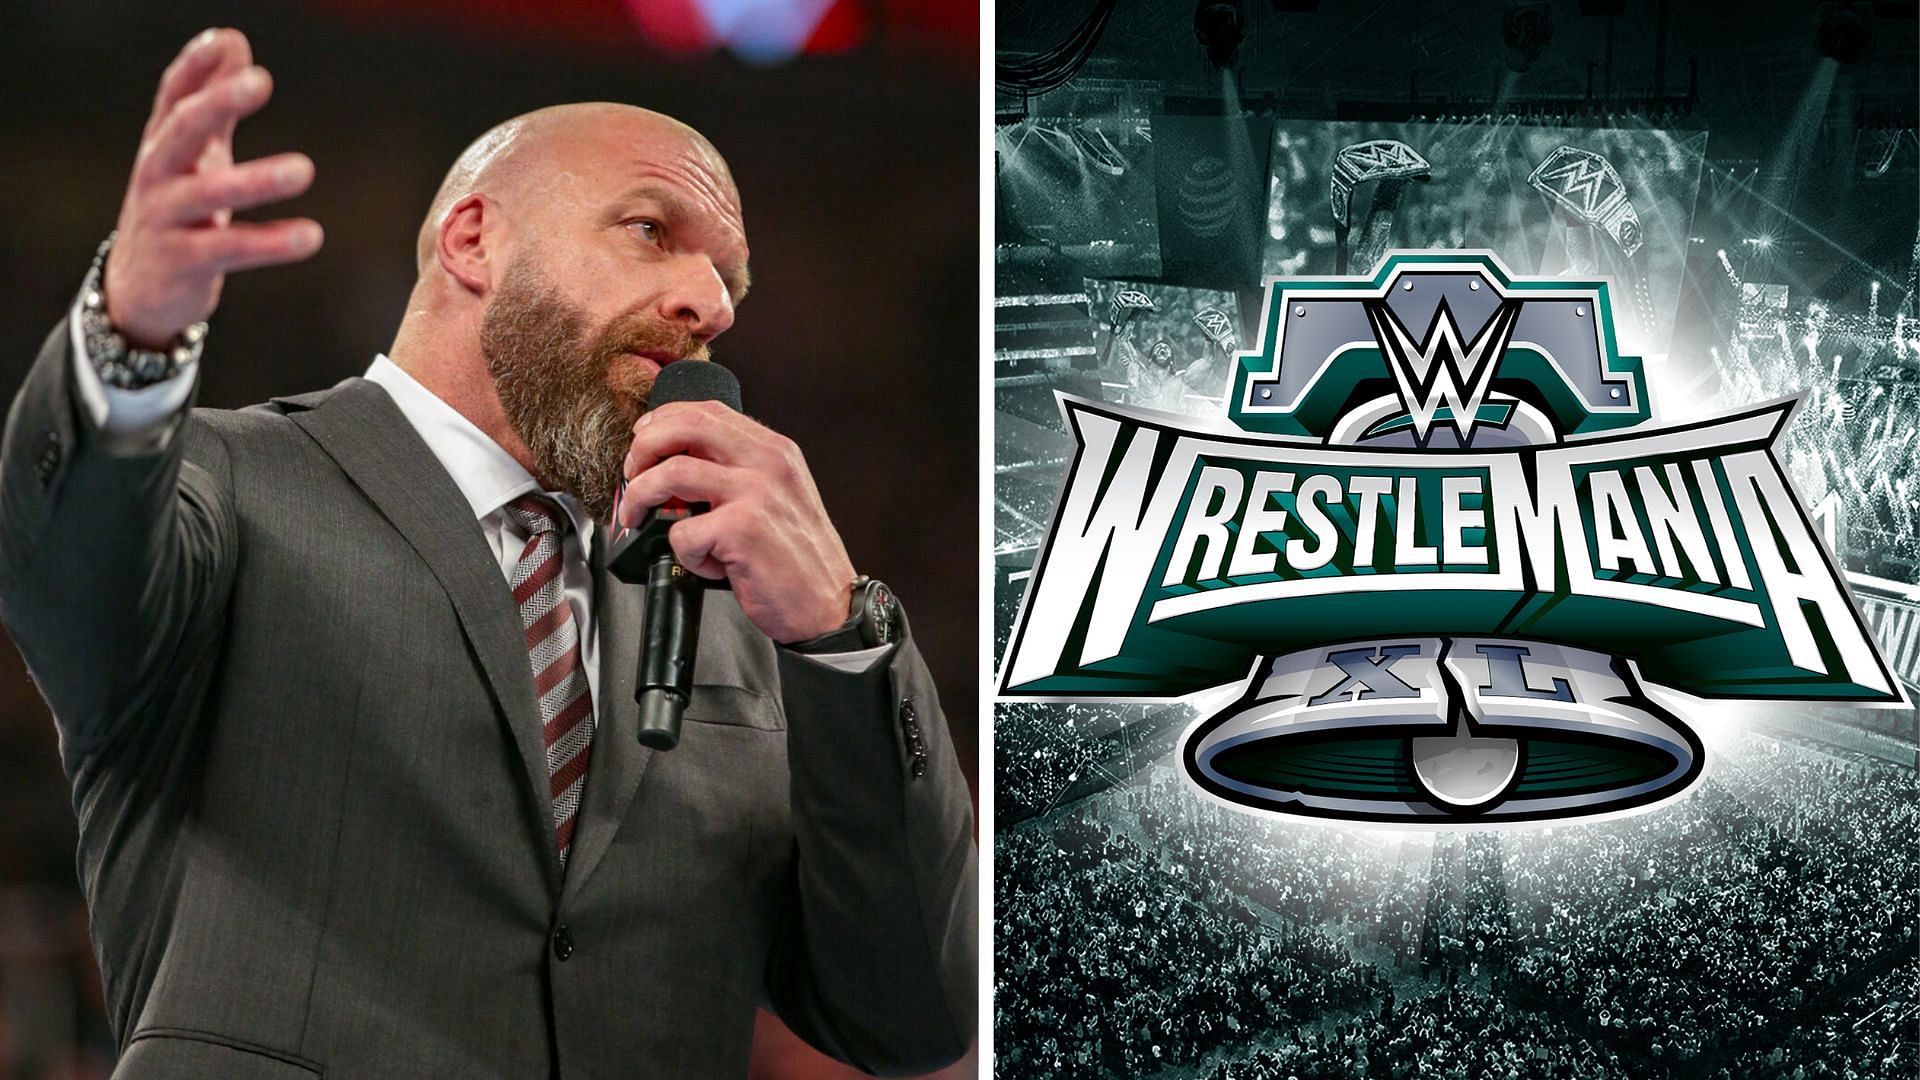 Triple H is gearing up for one of the biggest WWE WrestleMania